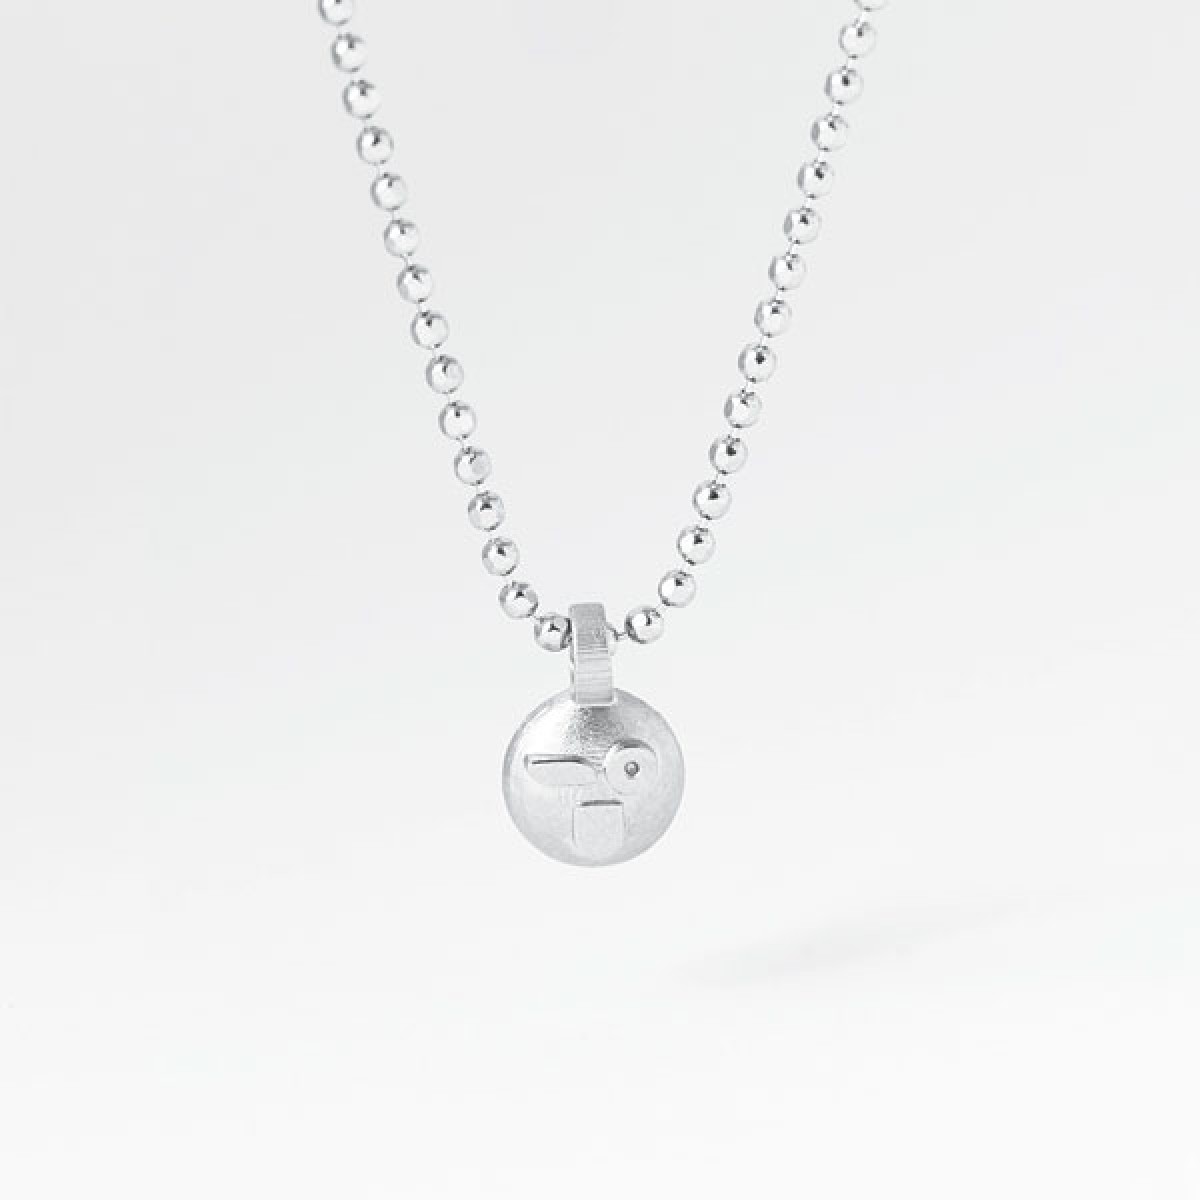 related by objects - vibe necklace - it's ok to be not ok - 925 Sterlingsilber - feinversilbert 